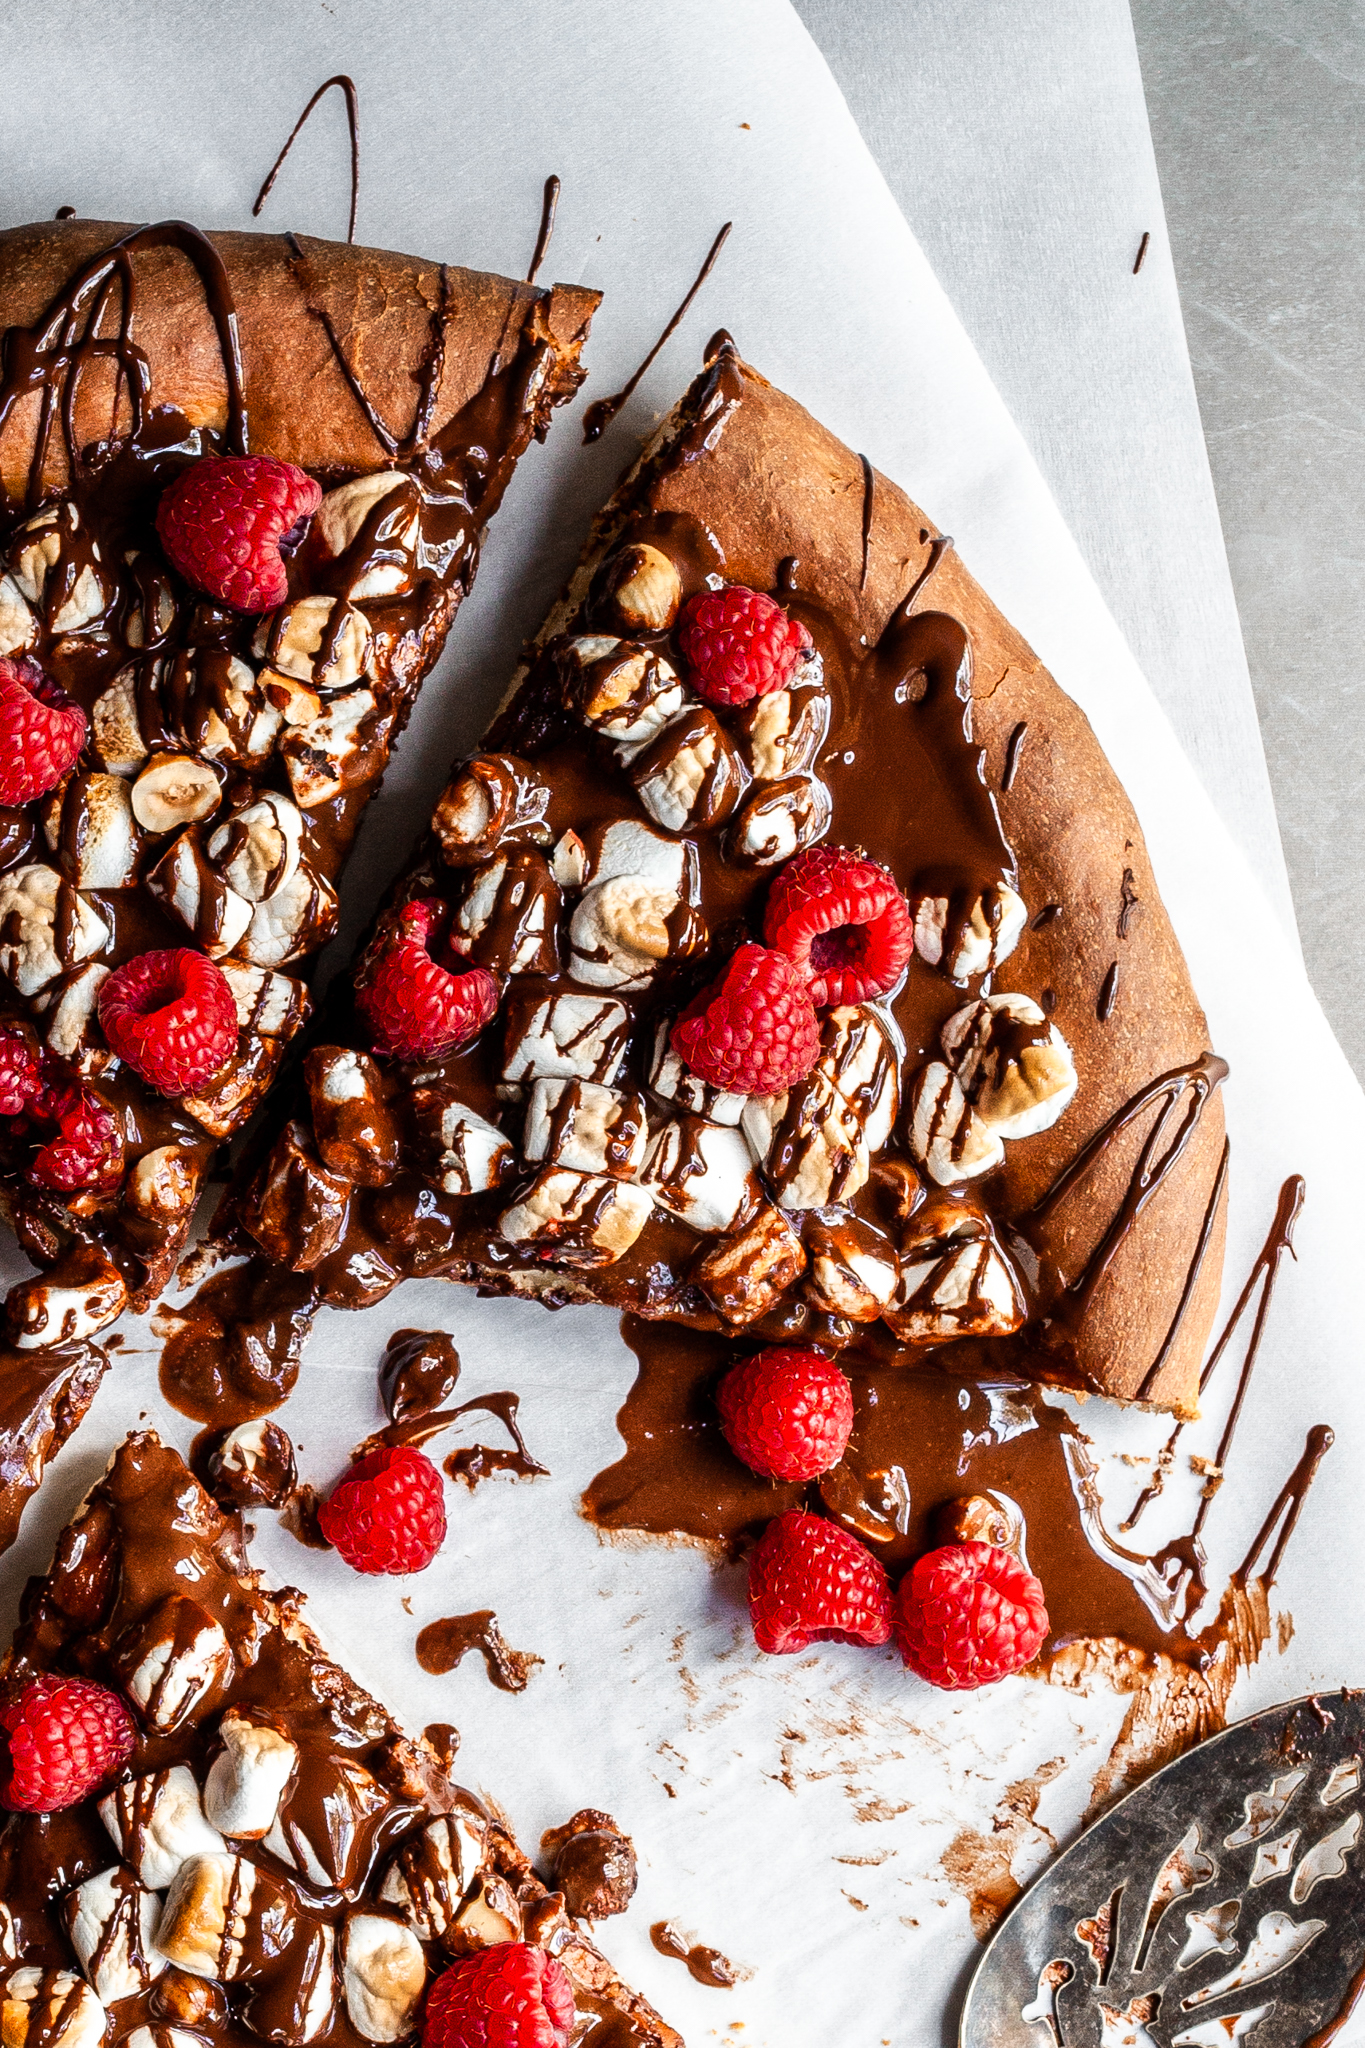 Cropped view of a dessert pizza covered in chocolate and marshmallows